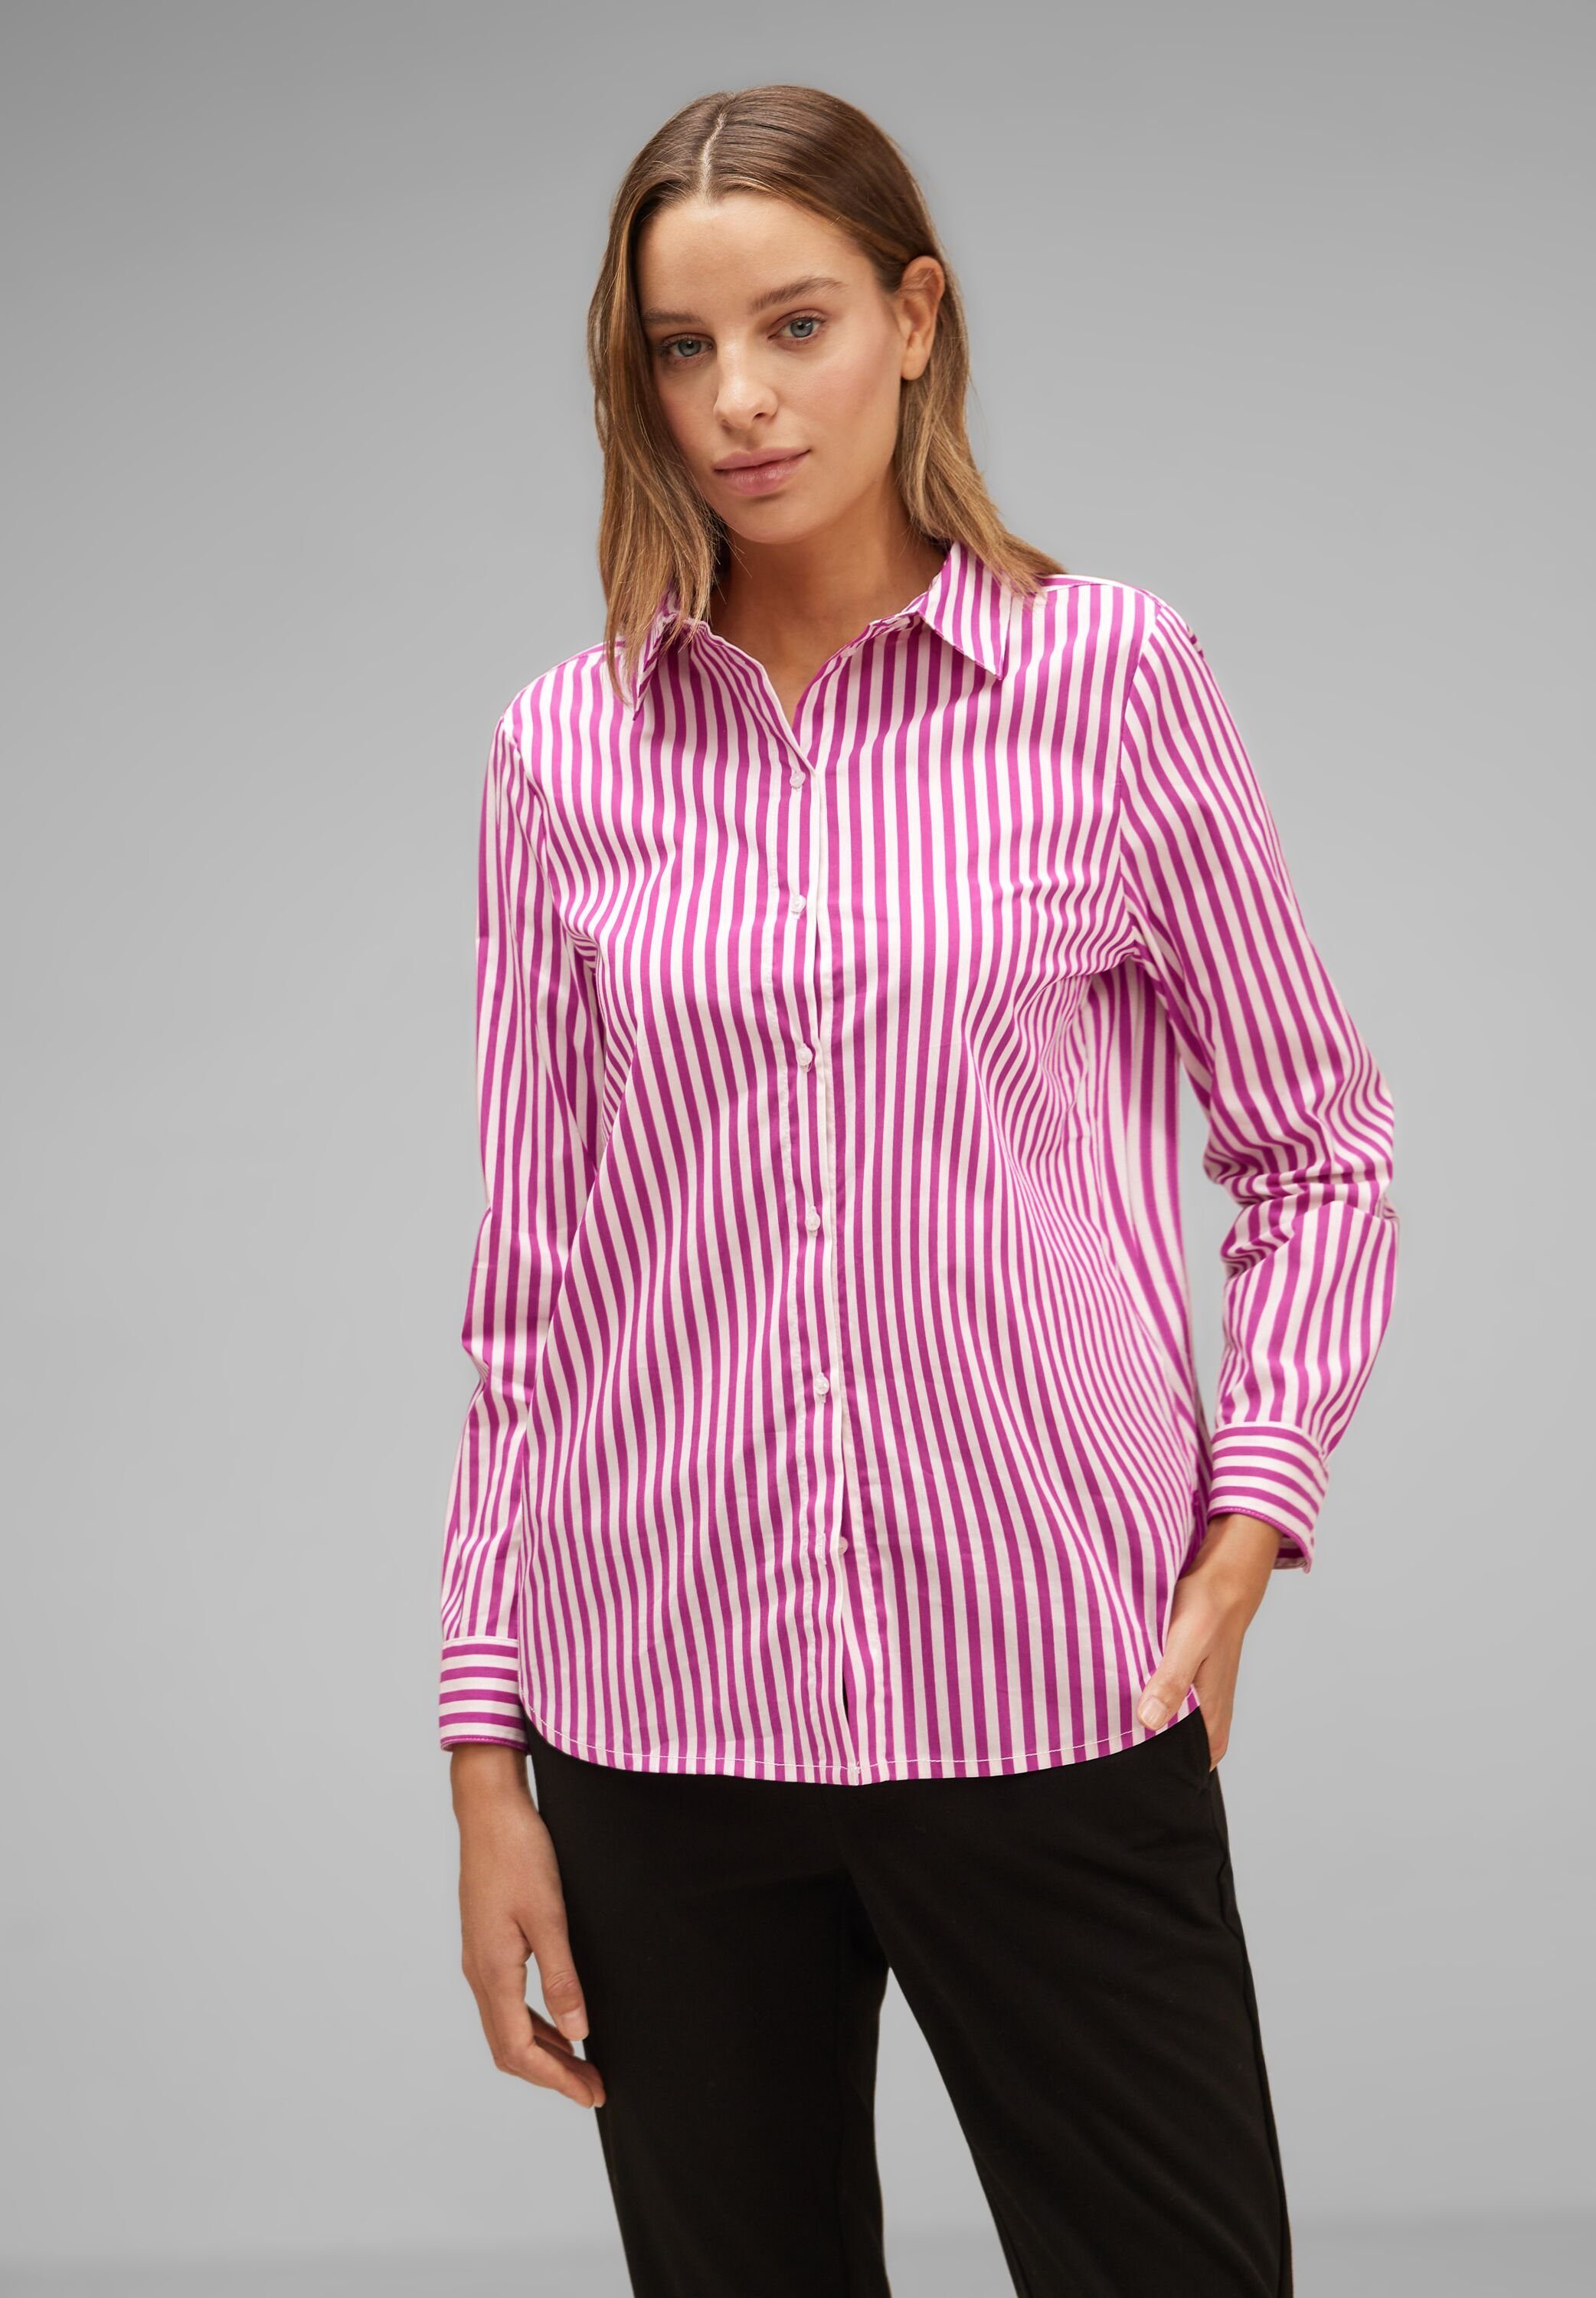 STREET ONE Longbluse Striped Office Blouse mit Streifenmuster bright cozy pink